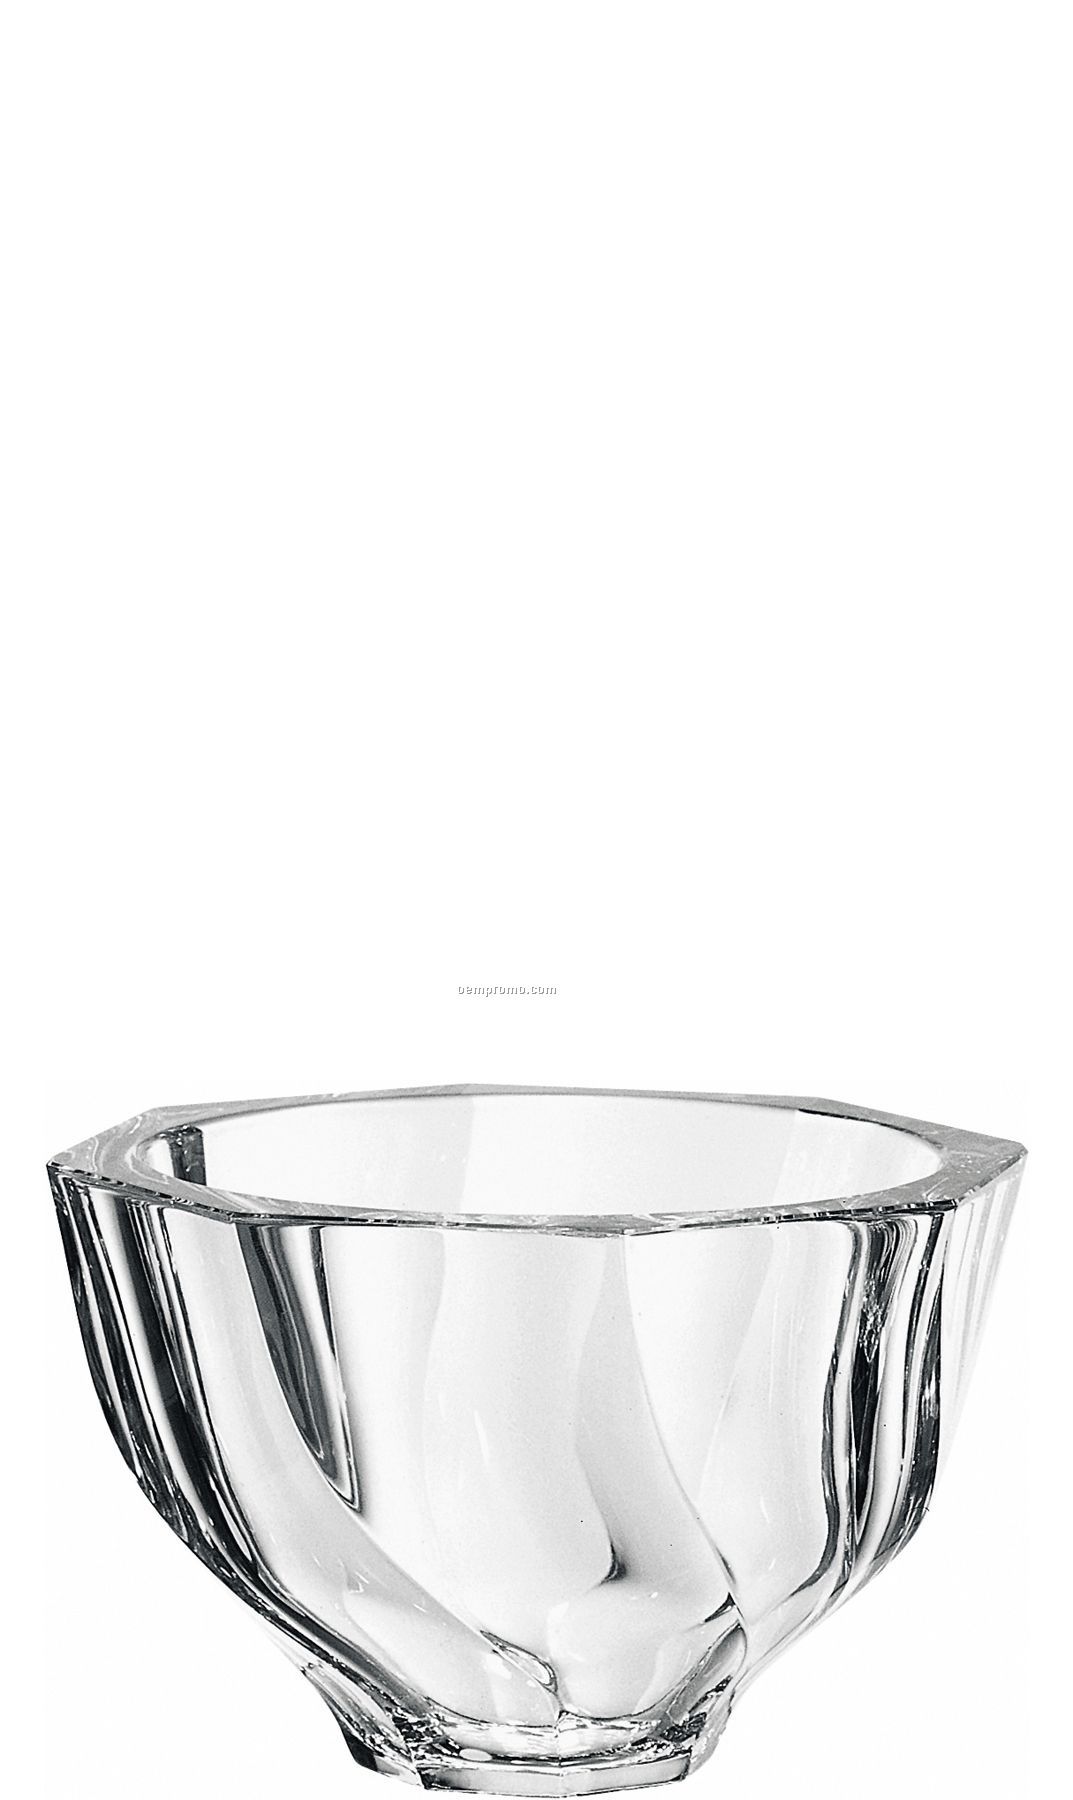 Residence Crystal Biased Cut Bowl By Olle Alberius (3 1/8